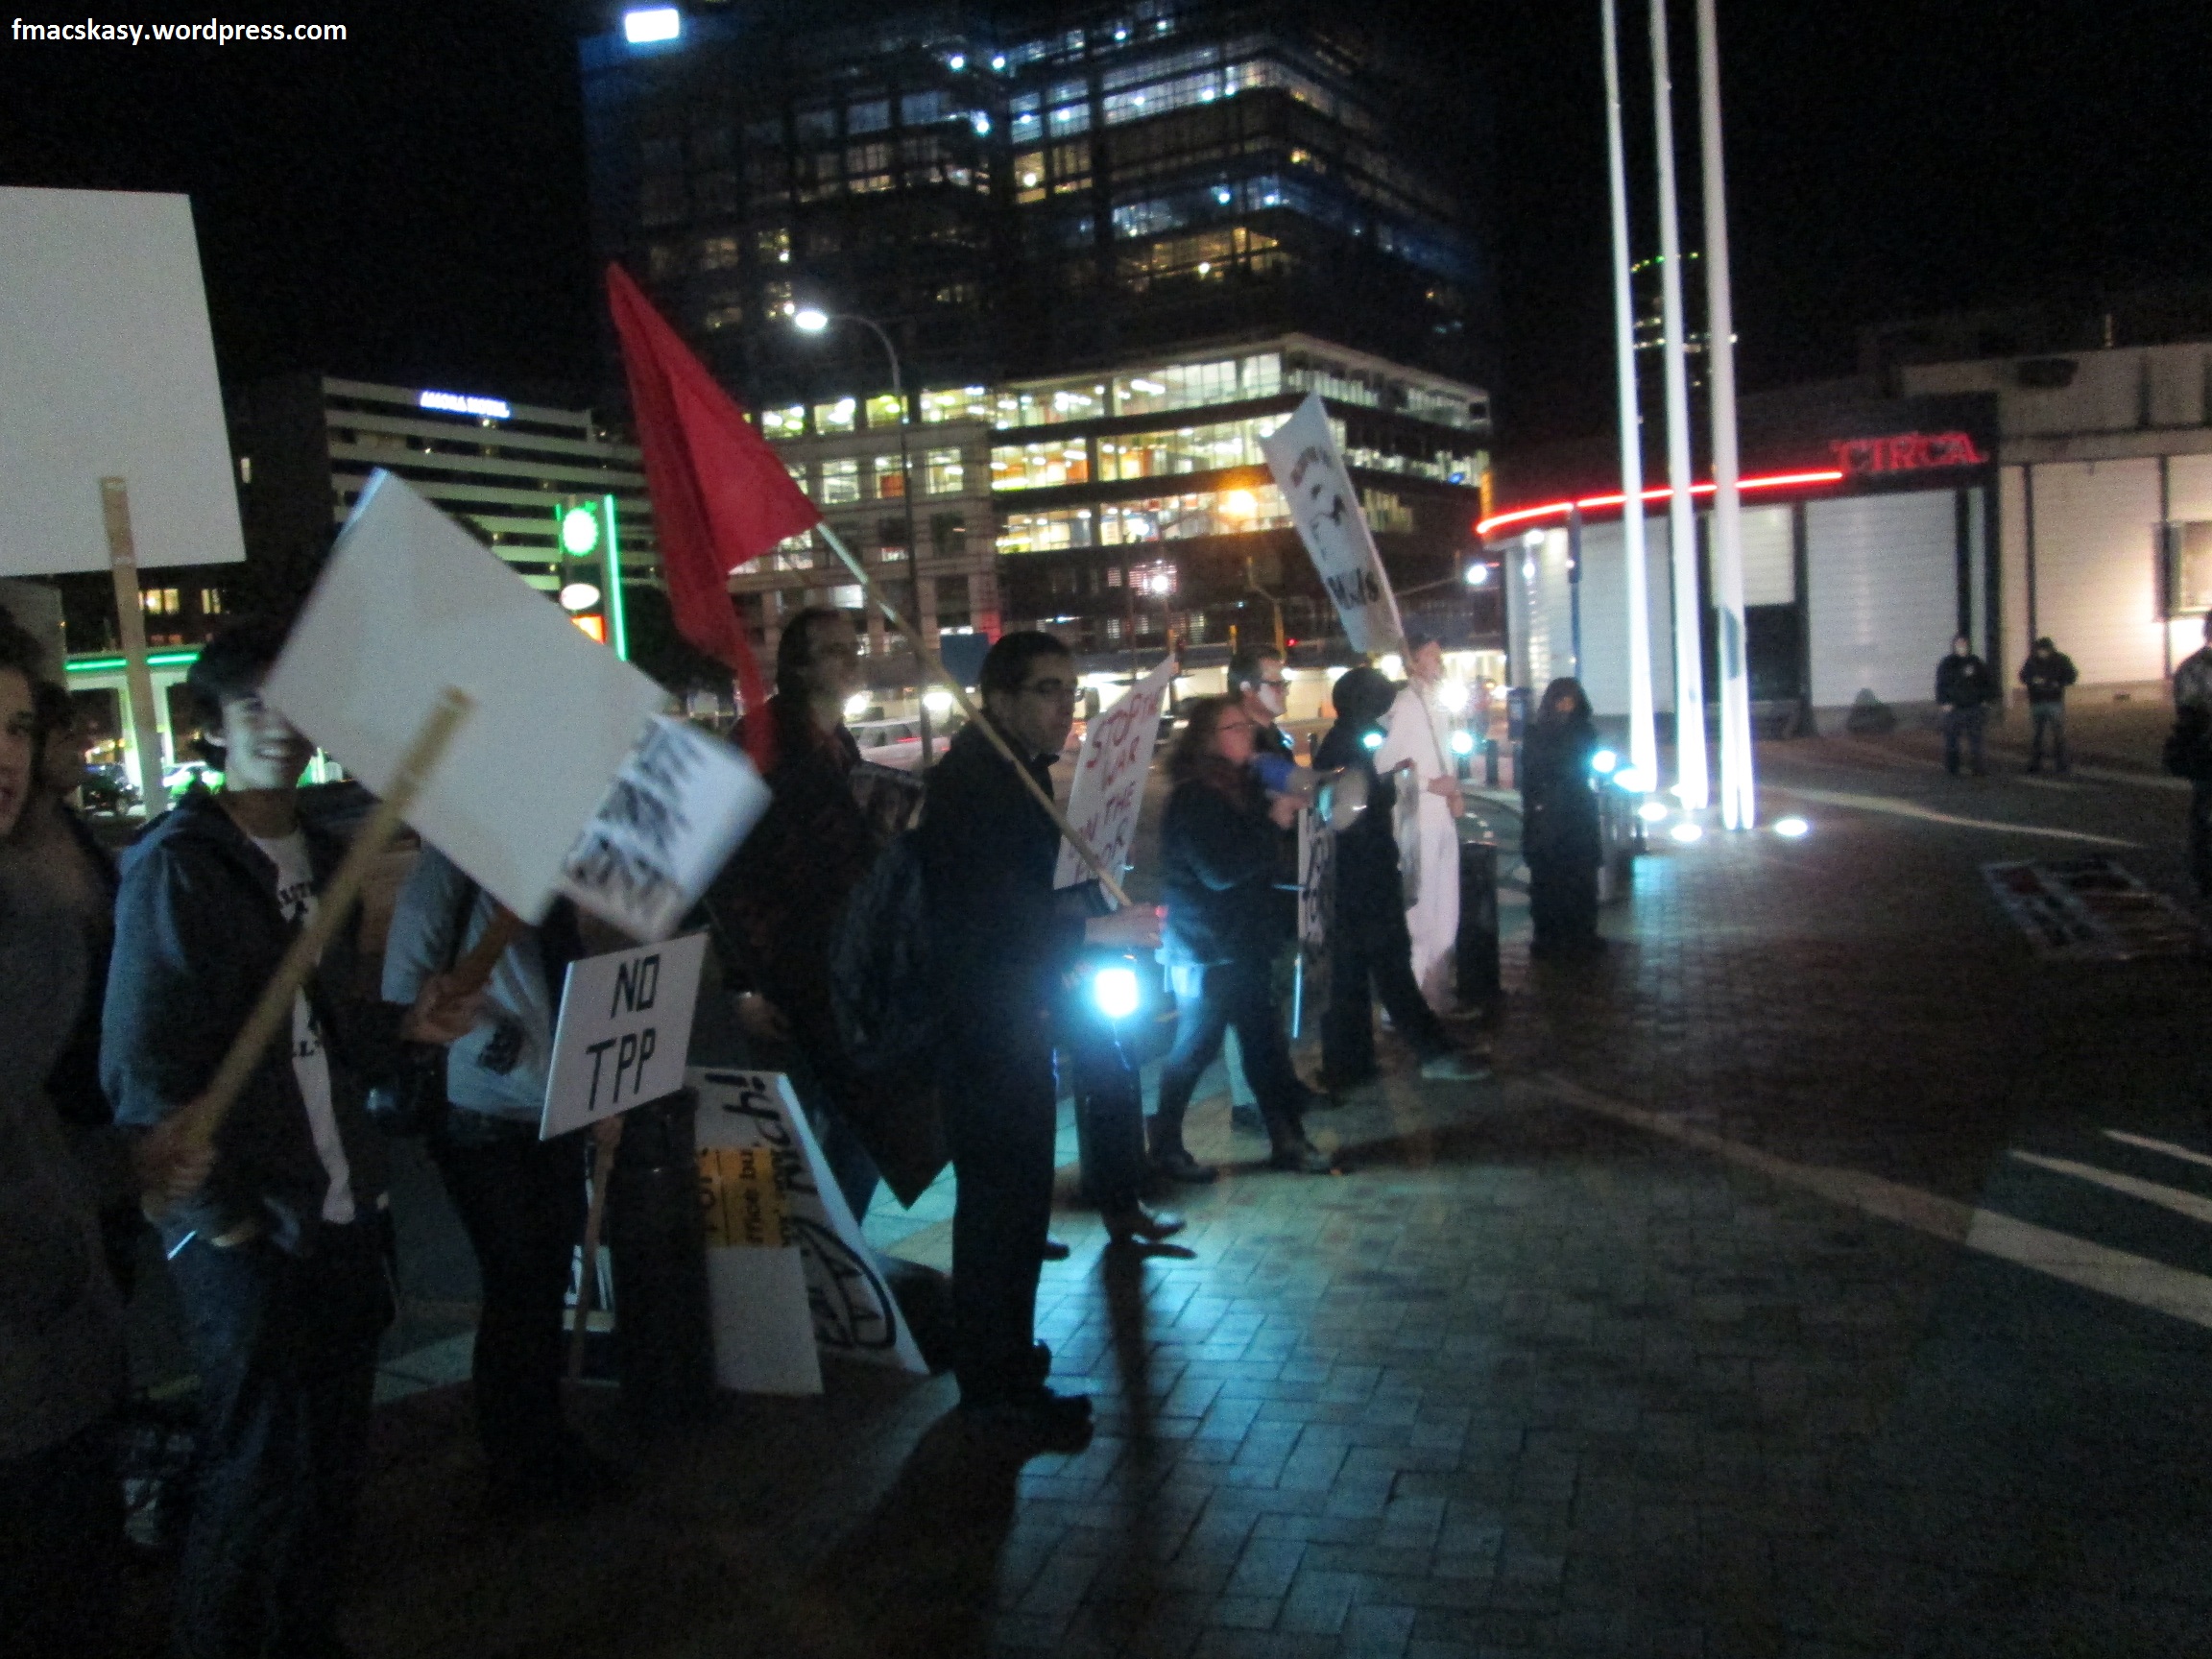 anti-National protest - Poneke Action Against Poverty - 28 June 2014 - Te Papa - Wellington (6)